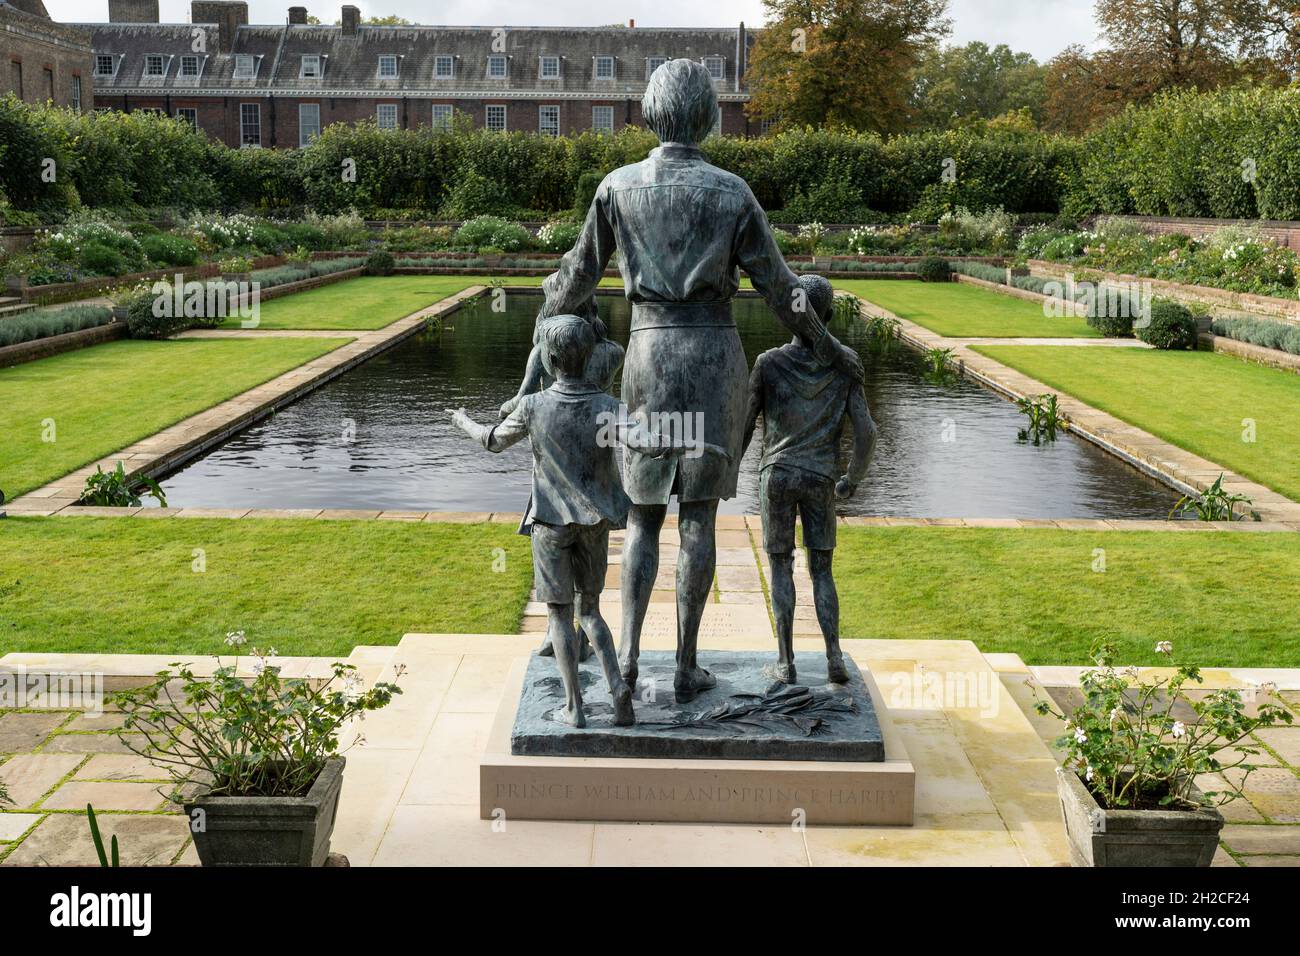 LONDON: The Princess Diana Memorial Garden at Kensington Palace in London. The statue is of Princess Diana with a group of children Photo: David Levenson/Alamy Stock Photo